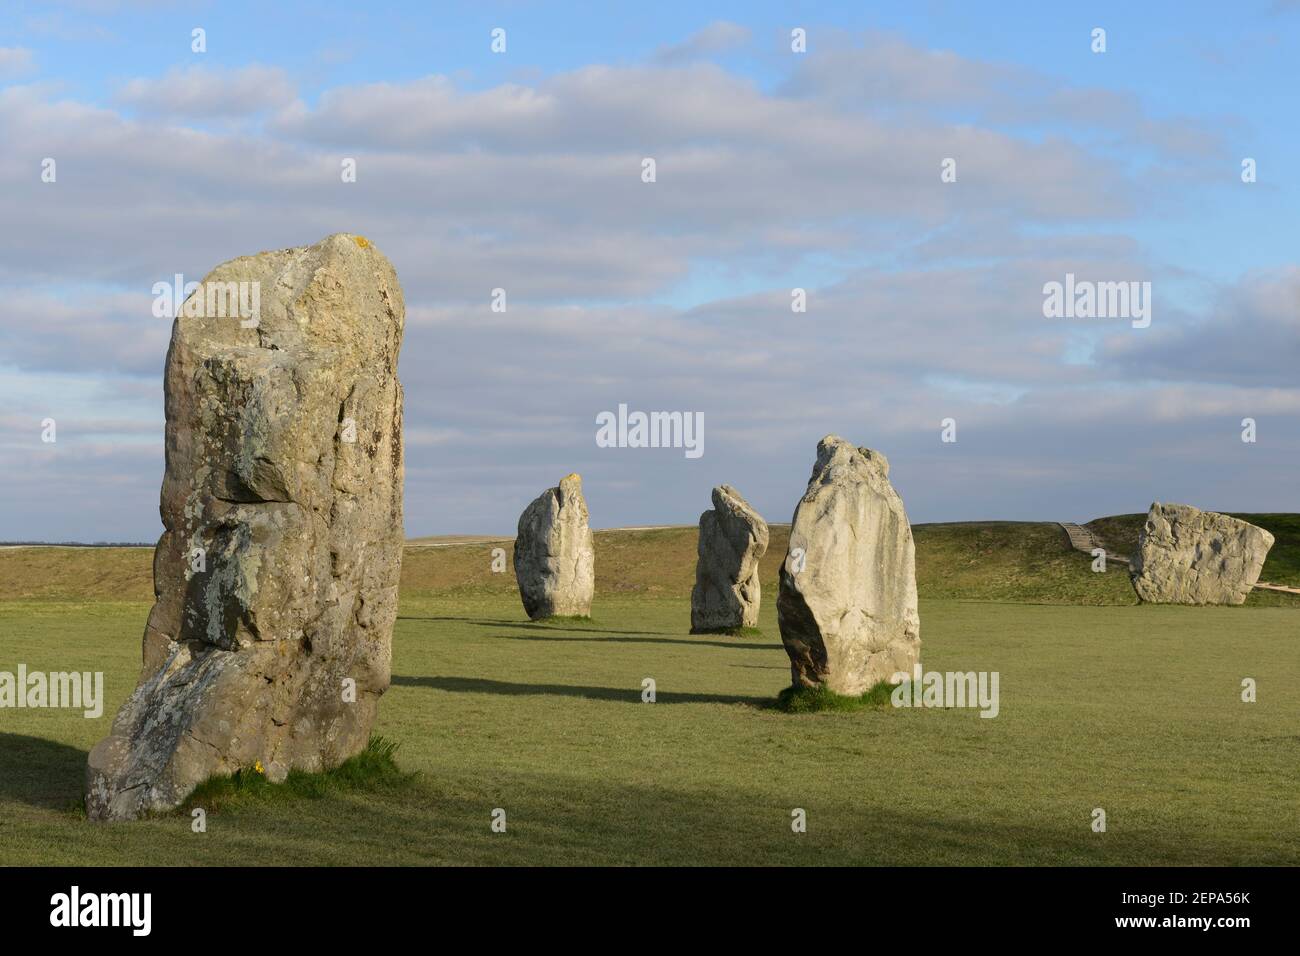 Part of the stone circle at Avebury, a World Heritage Site in Wiltshire, UK. Stock Photo